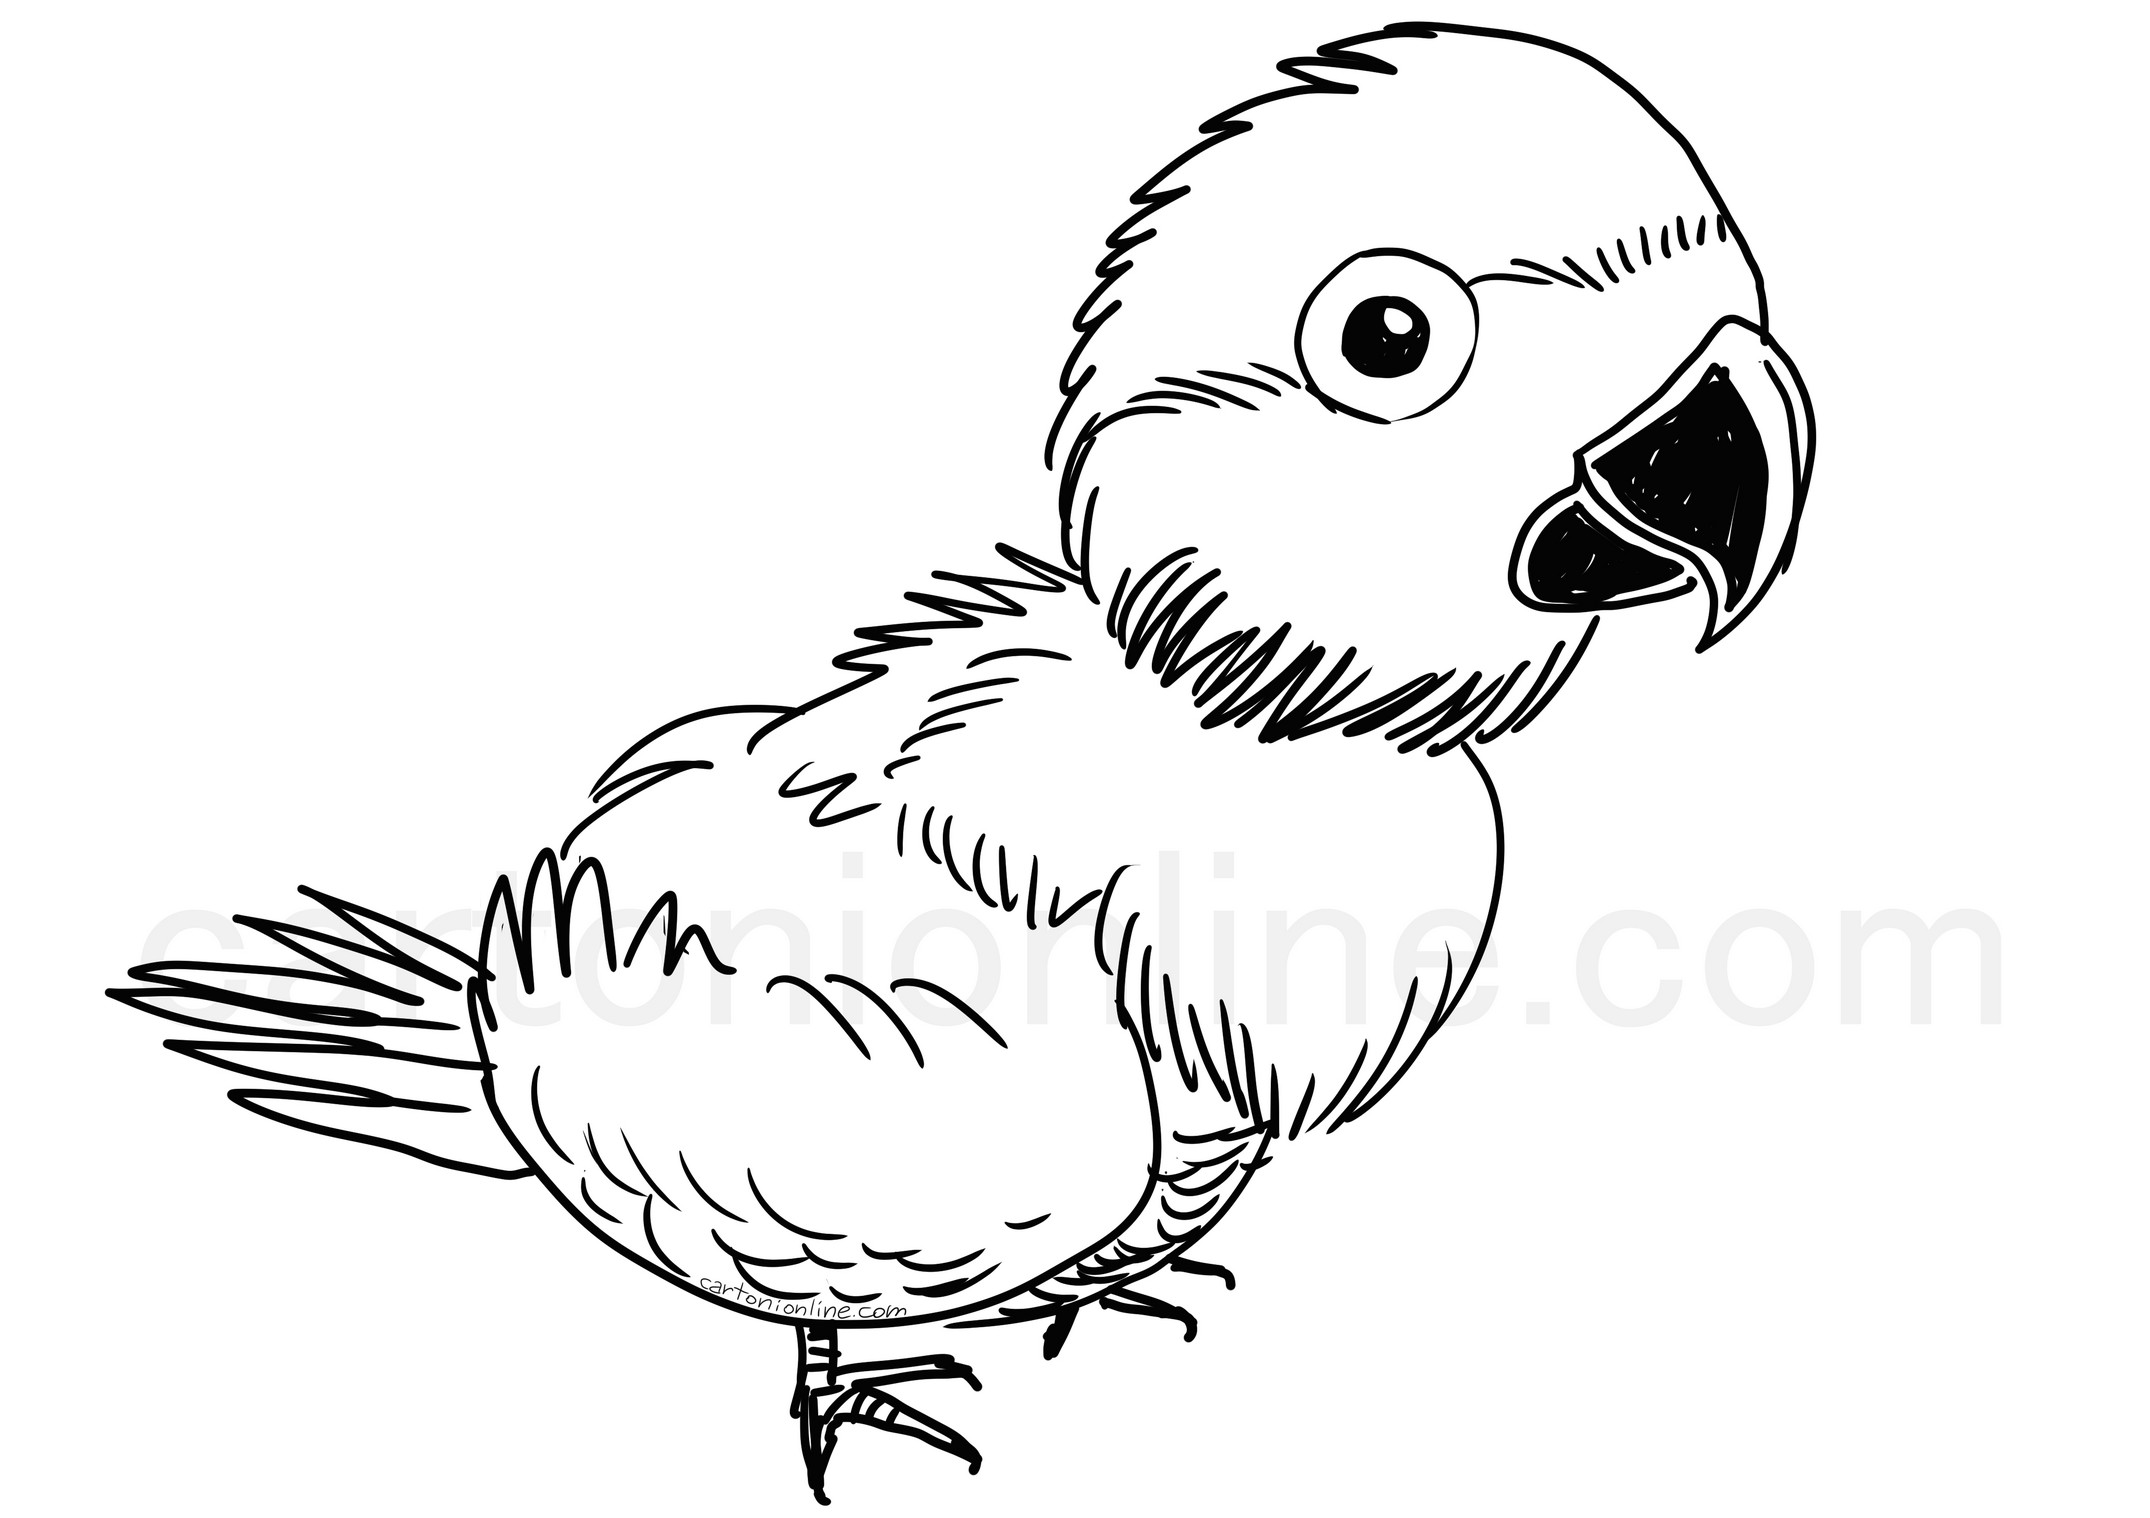 Realistic Macaw Parrot coloring page